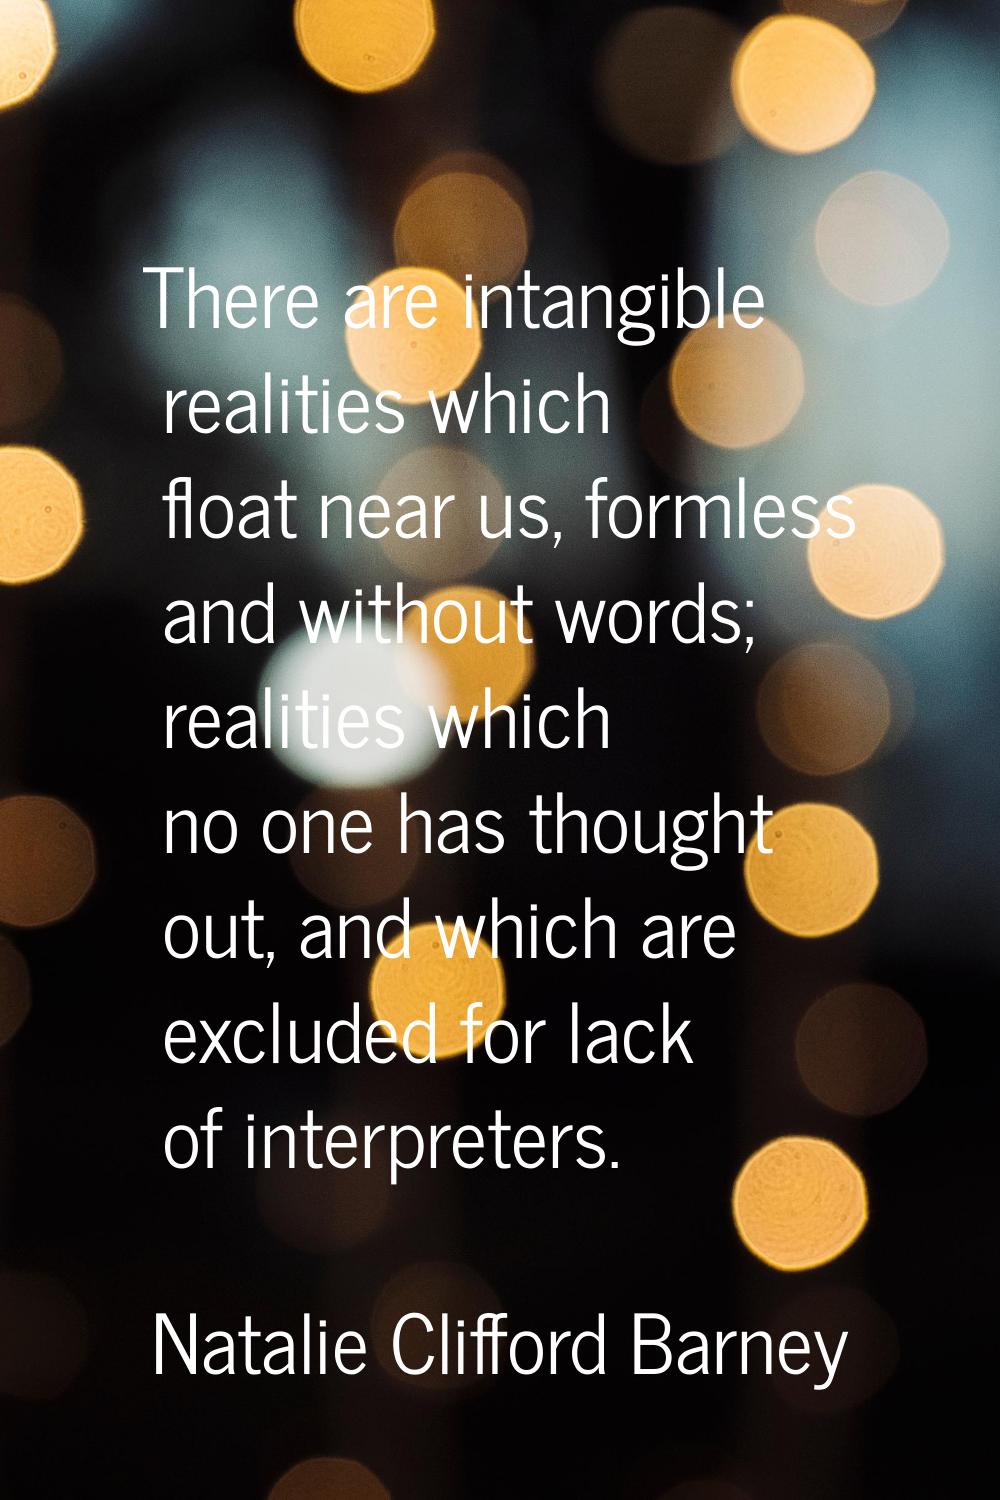 There are intangible realities which float near us, formless and without words; realities which no 